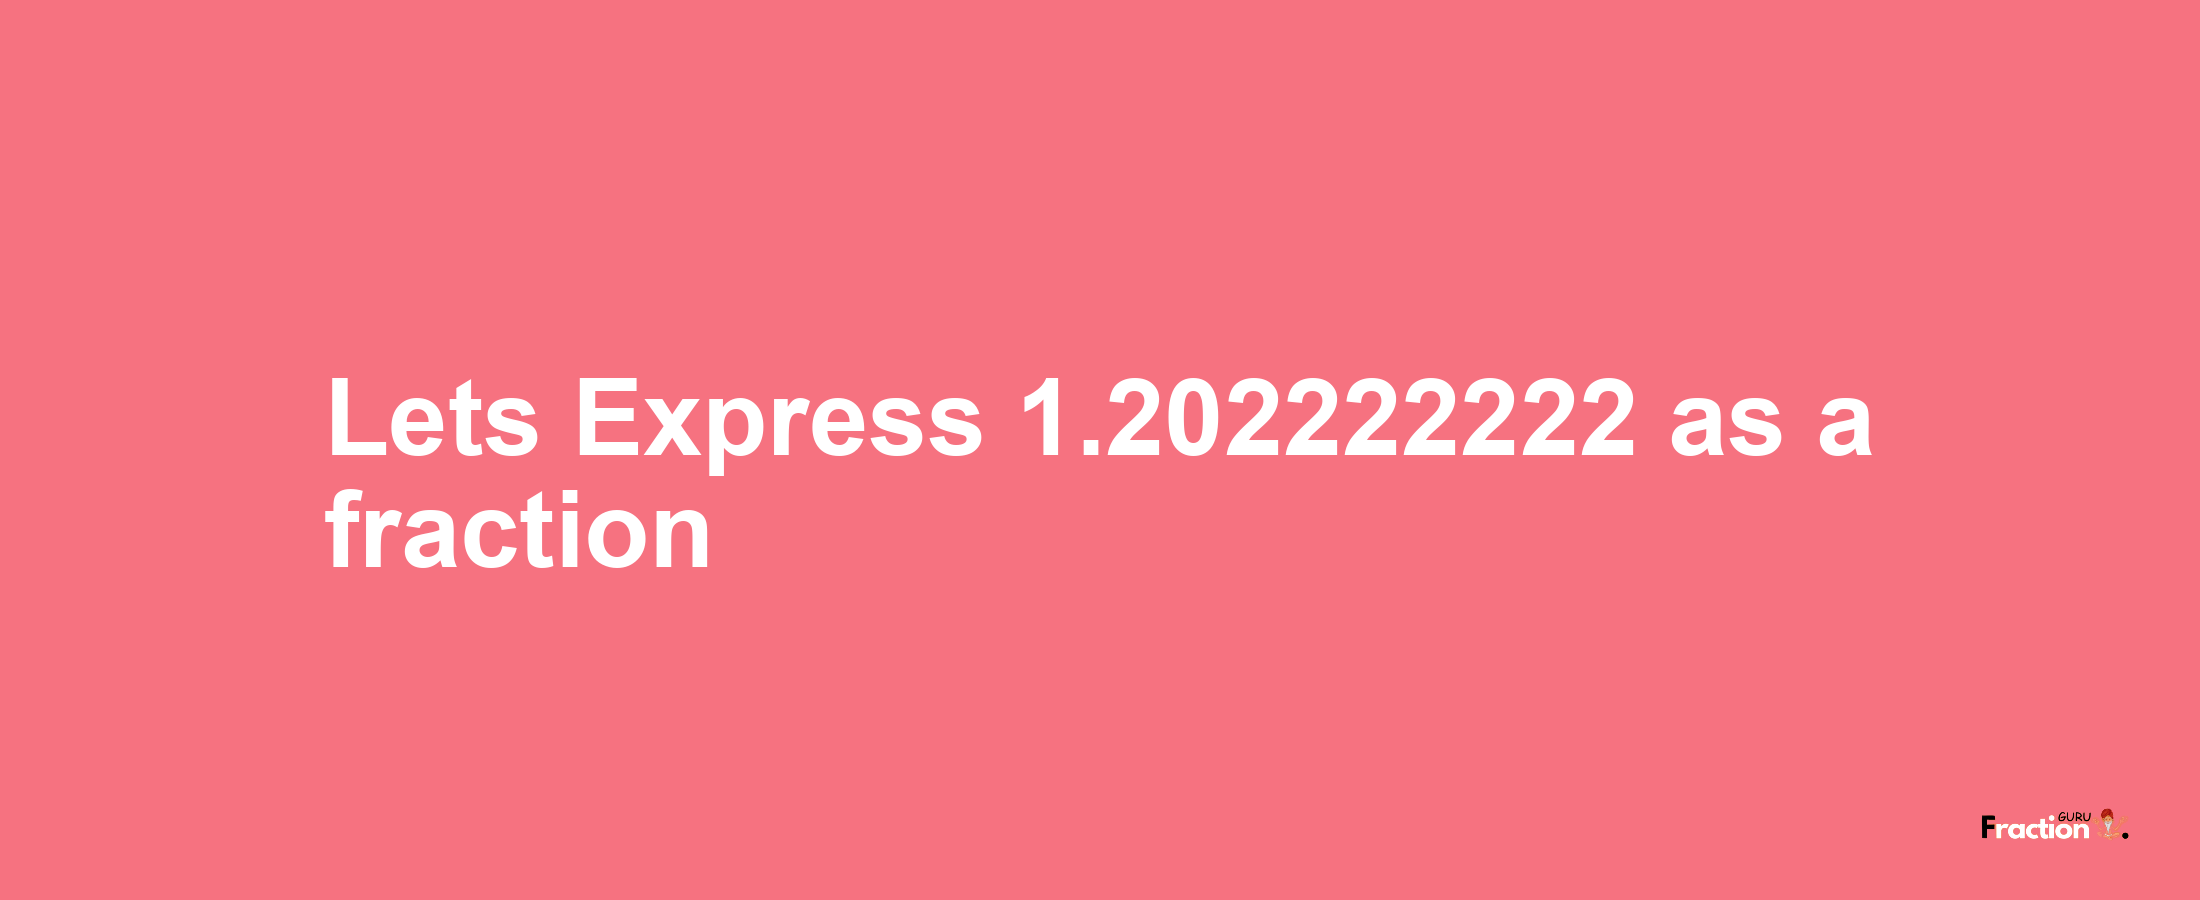 Lets Express 1.202222222 as afraction